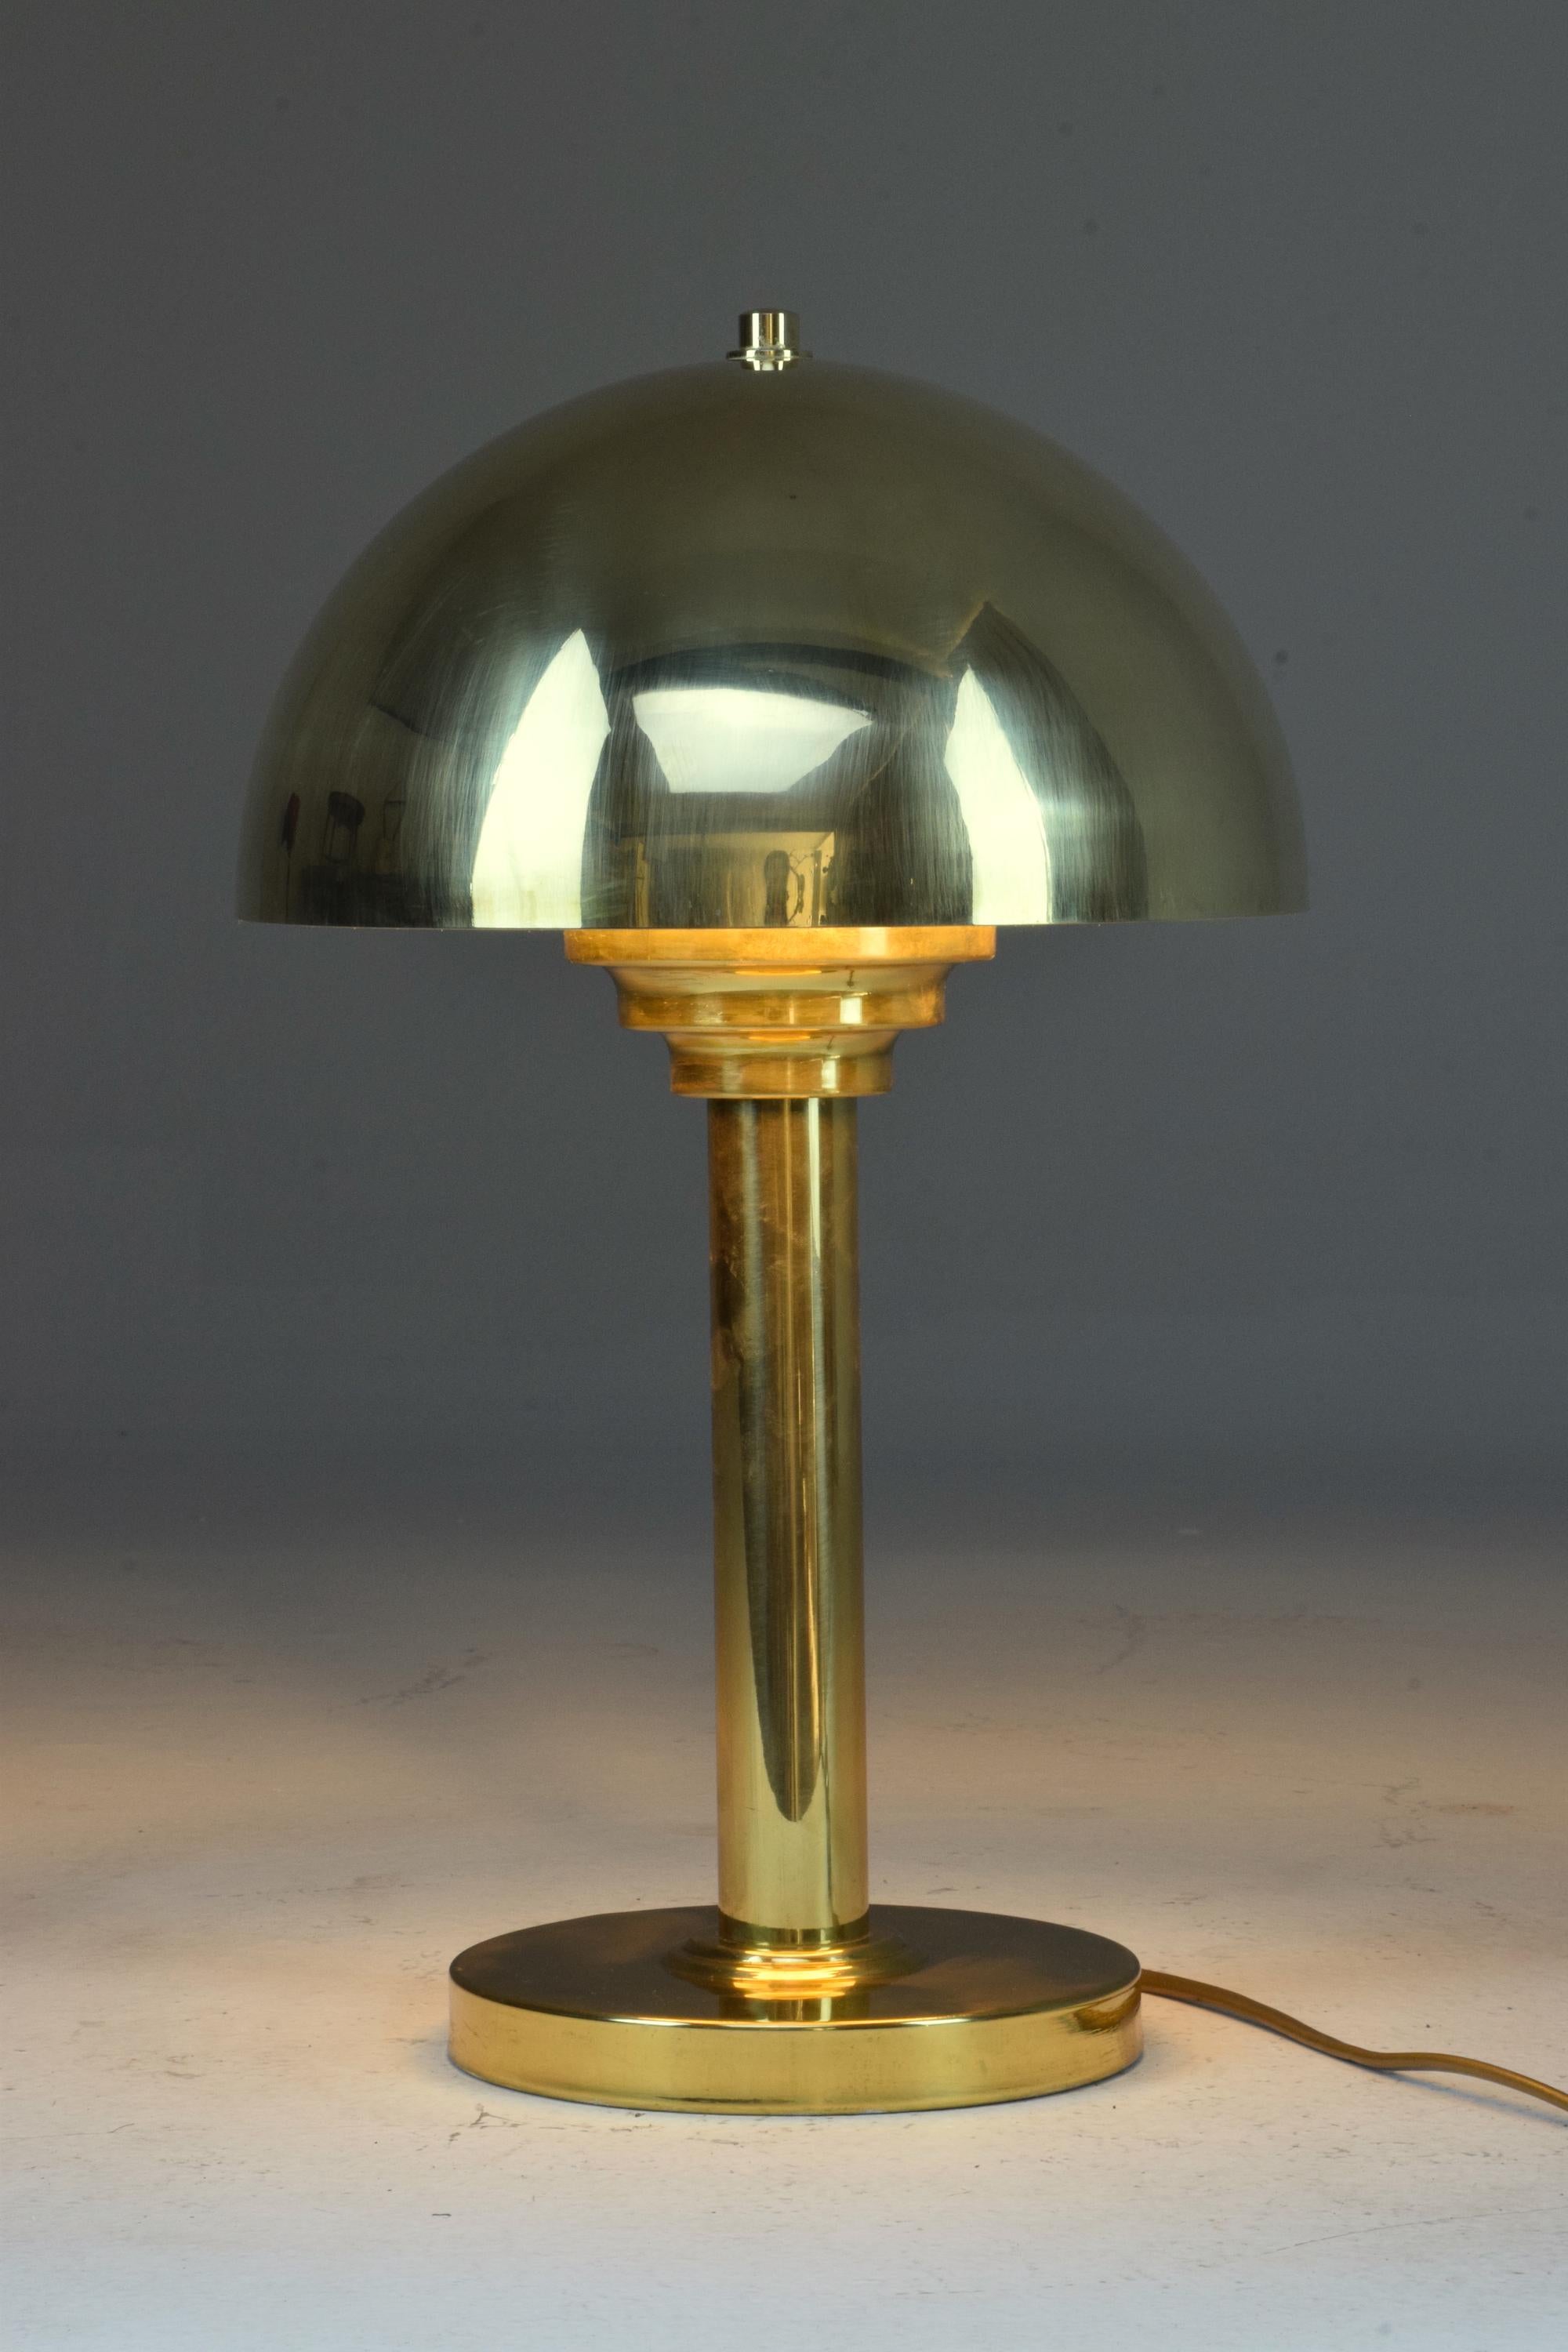 A French mushroom-shaped Art Deco style 20th century table or desk lamp in brass.

All our pieces are fully restored at our atelier and we only offer items that will last another lifetime. There may be light age-related wear but no hard damages or